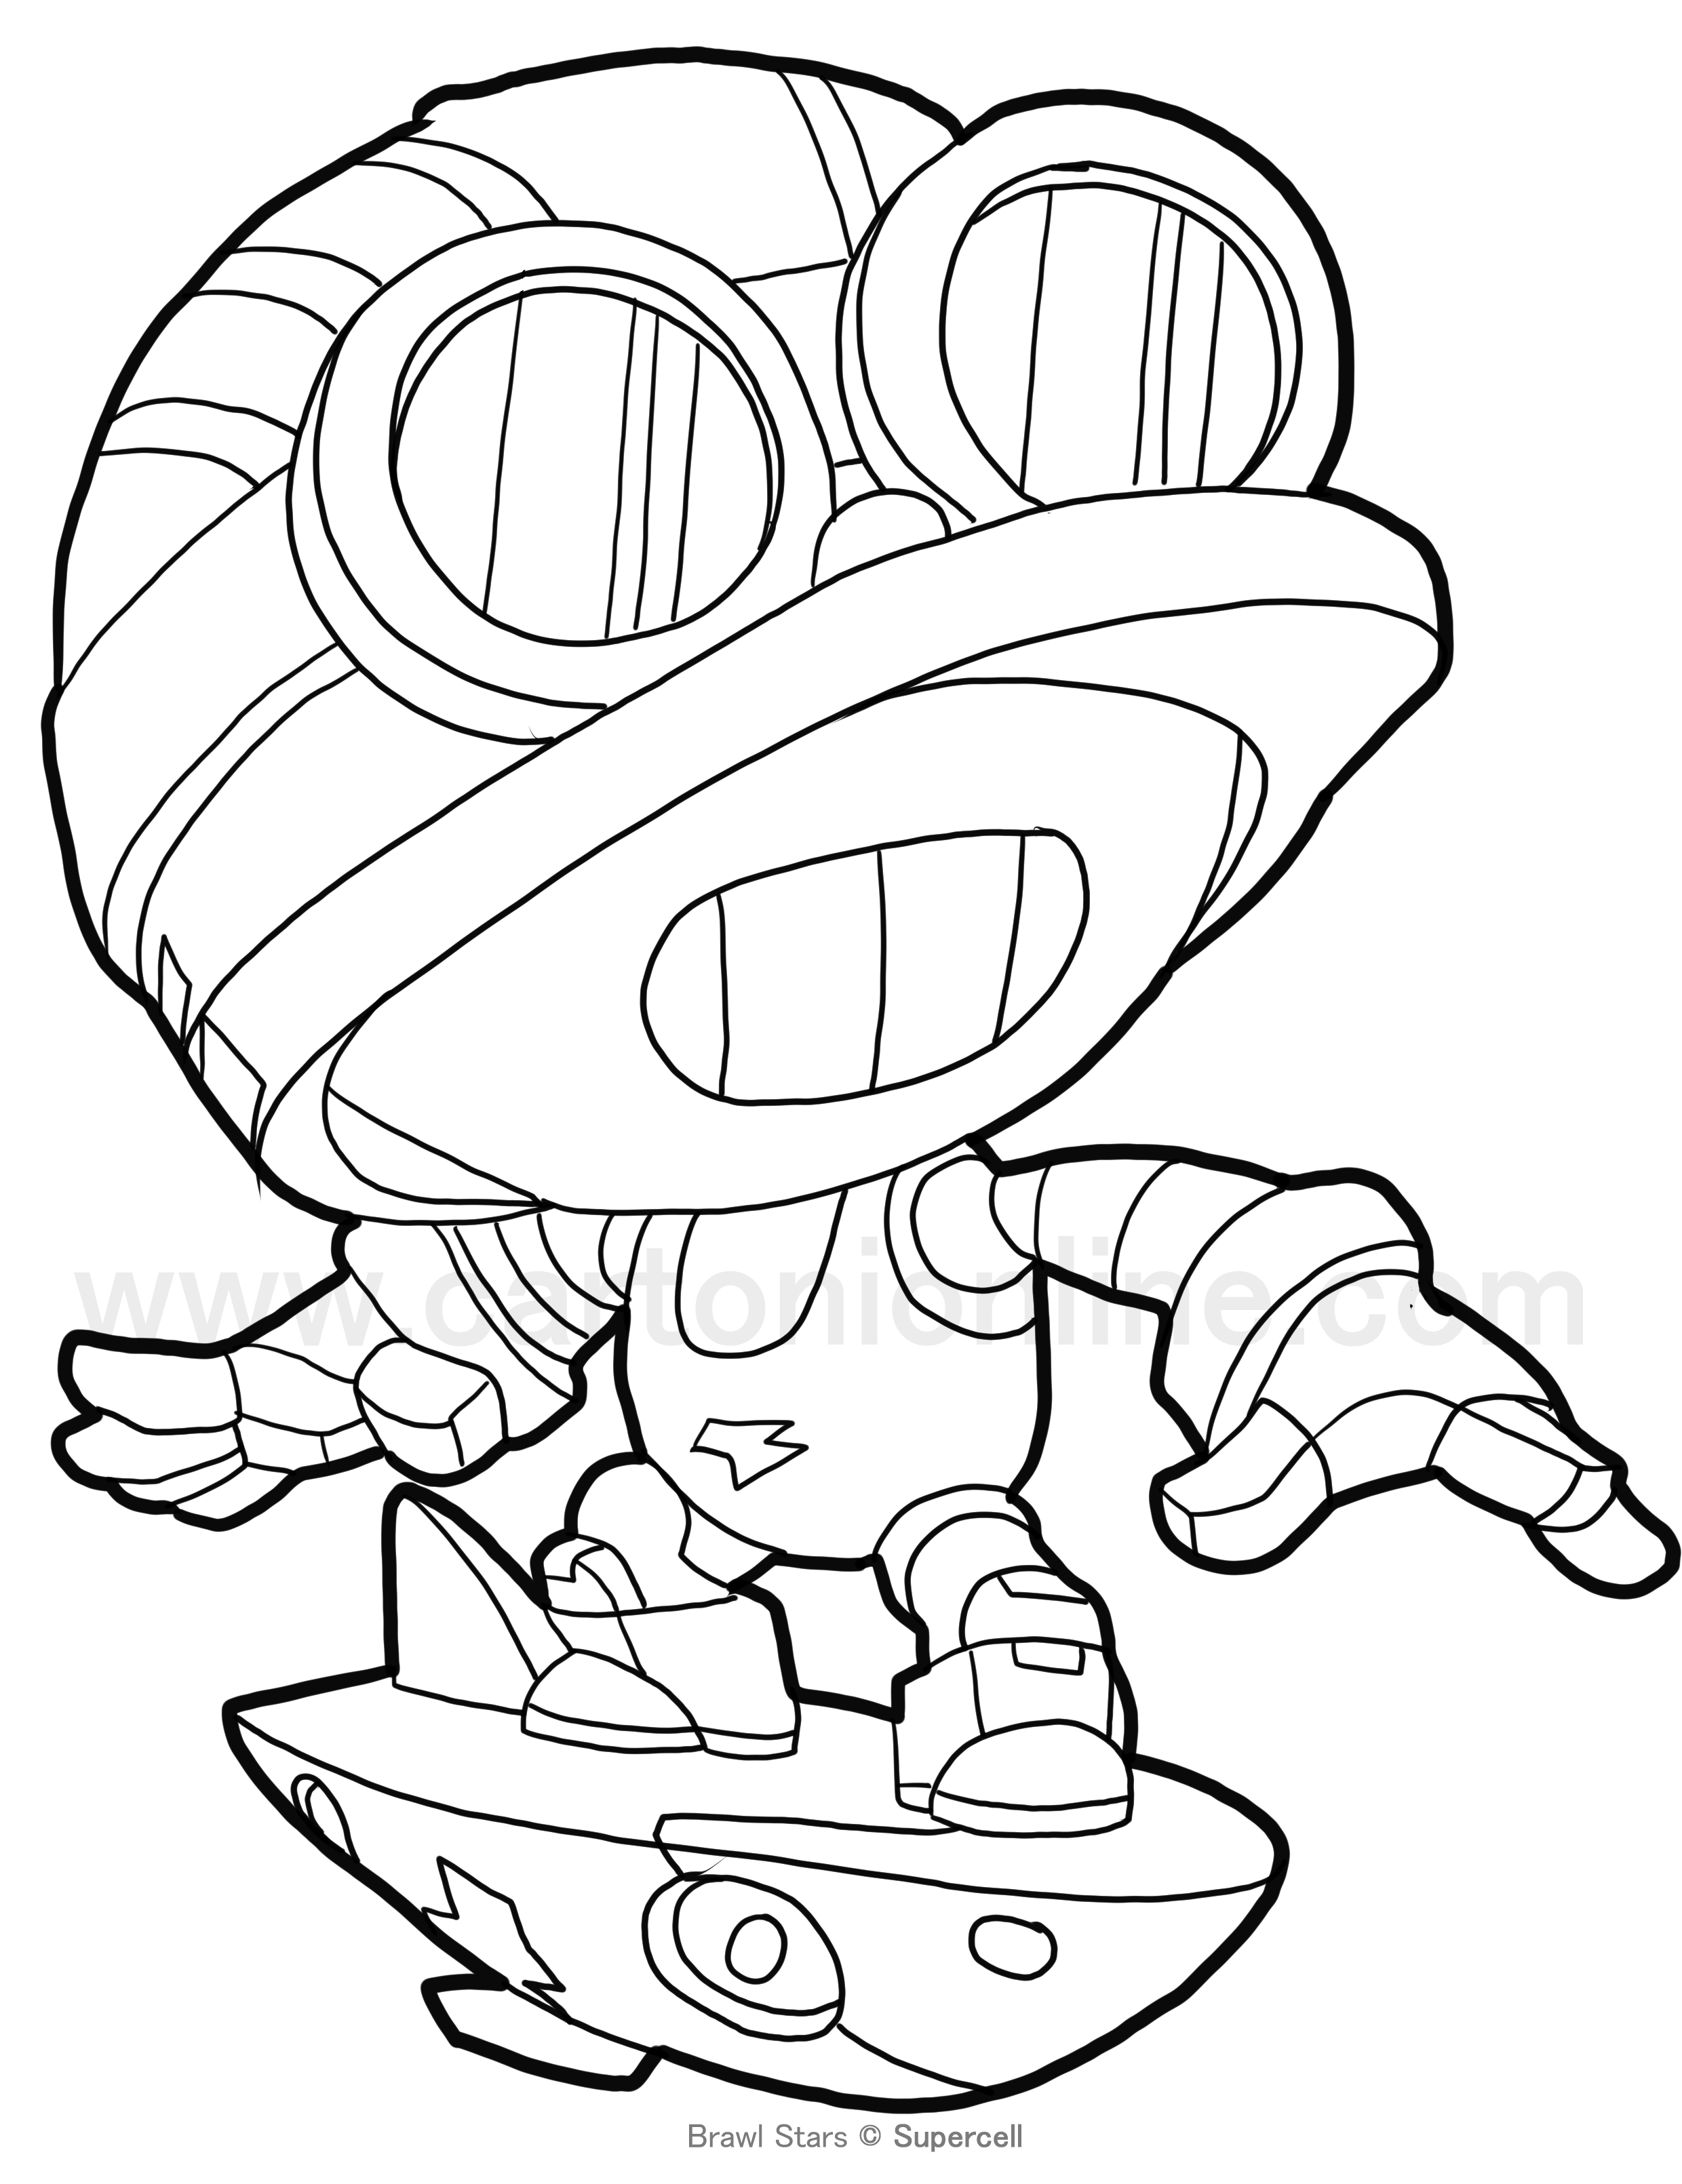 Jurassic Splash von Brawl Stars coloring page to print and coloring